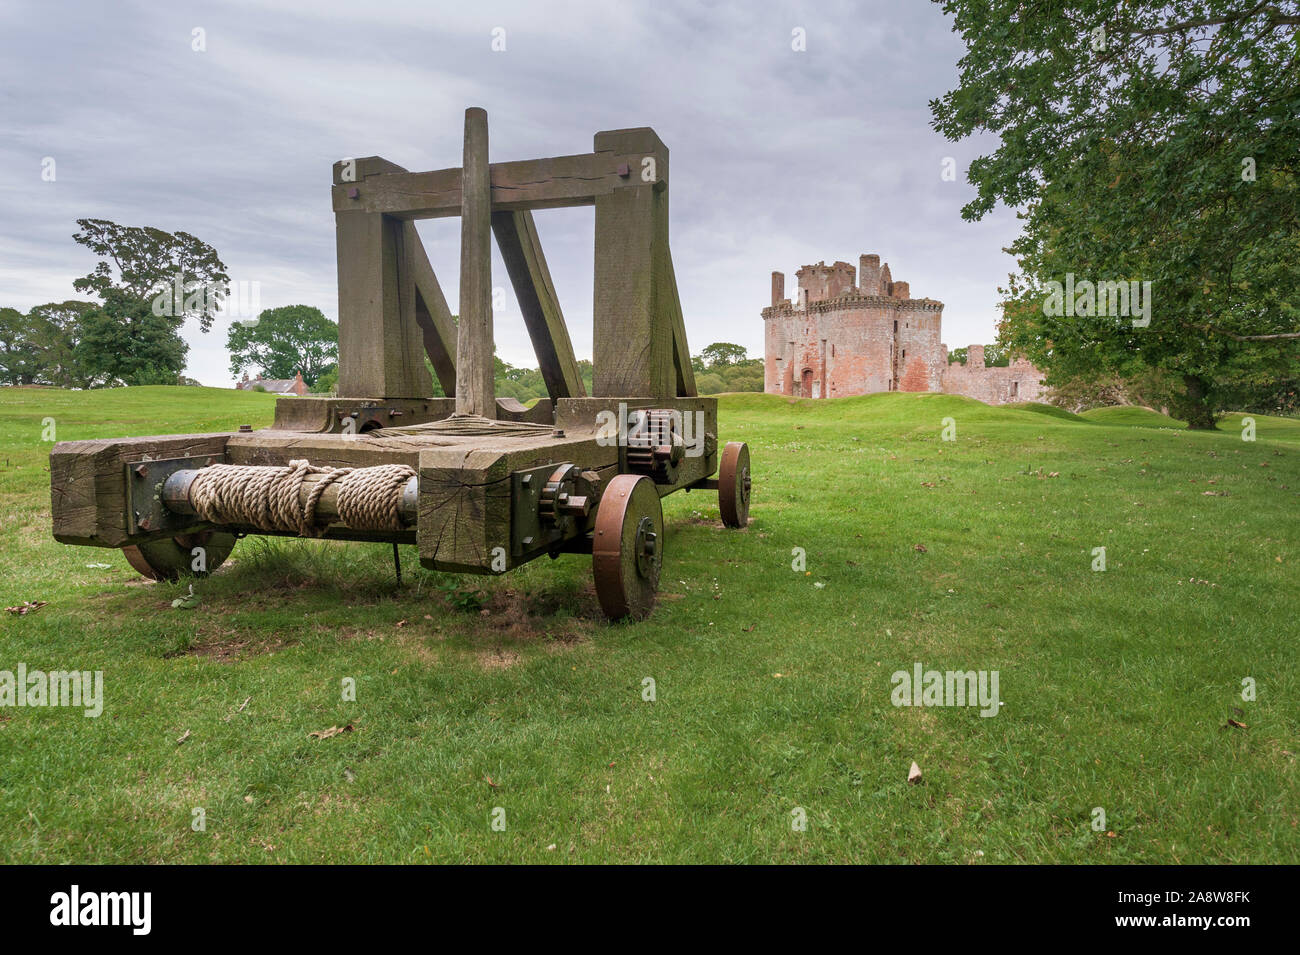 Caerlaverock castle with facsimile medieval catapult siege engine in the foreground Stock Photo